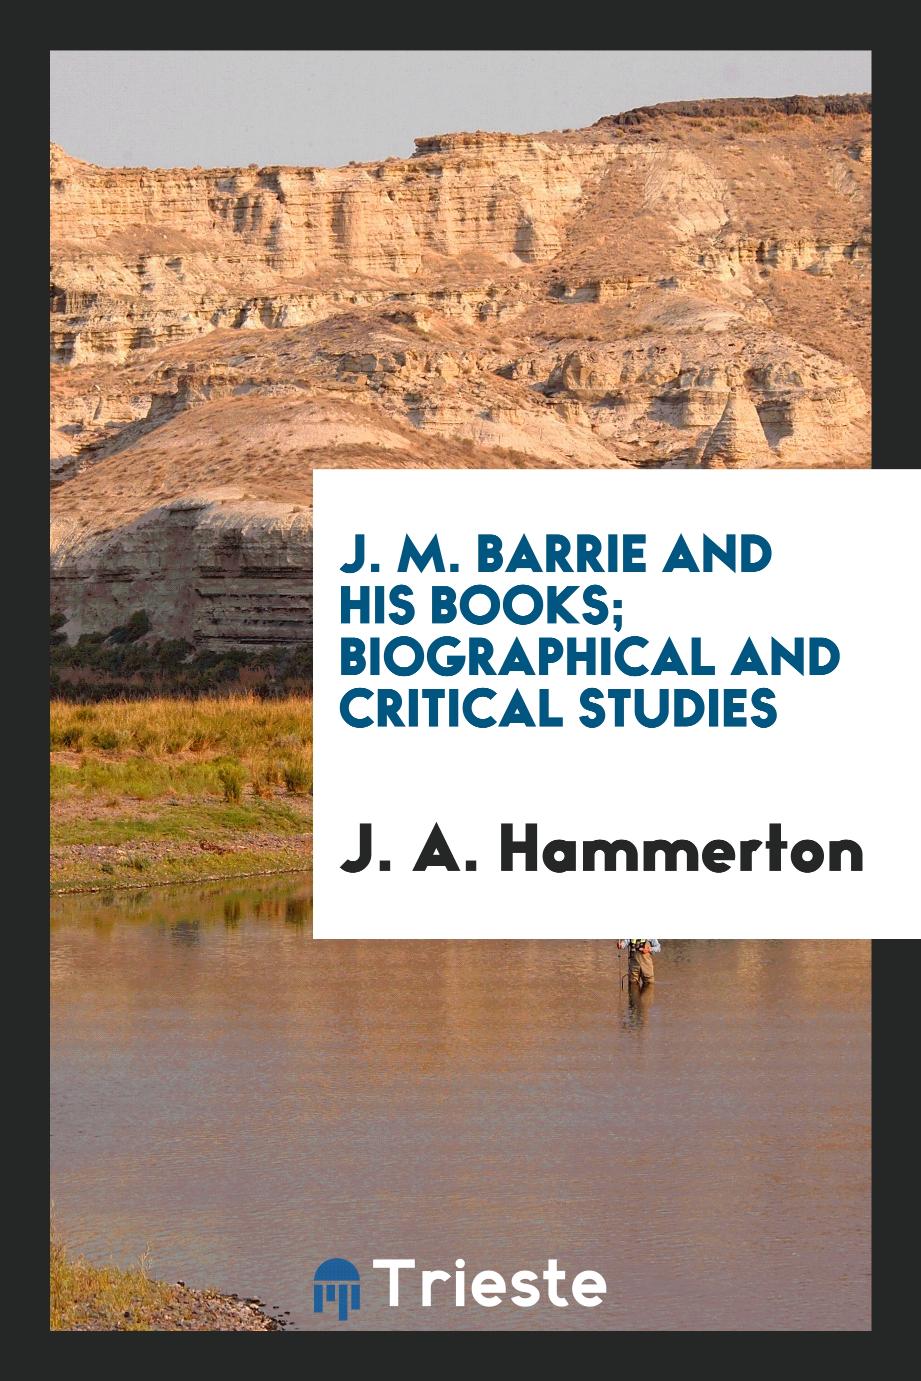 J. M. Barrie and his books; biographical and critical studies